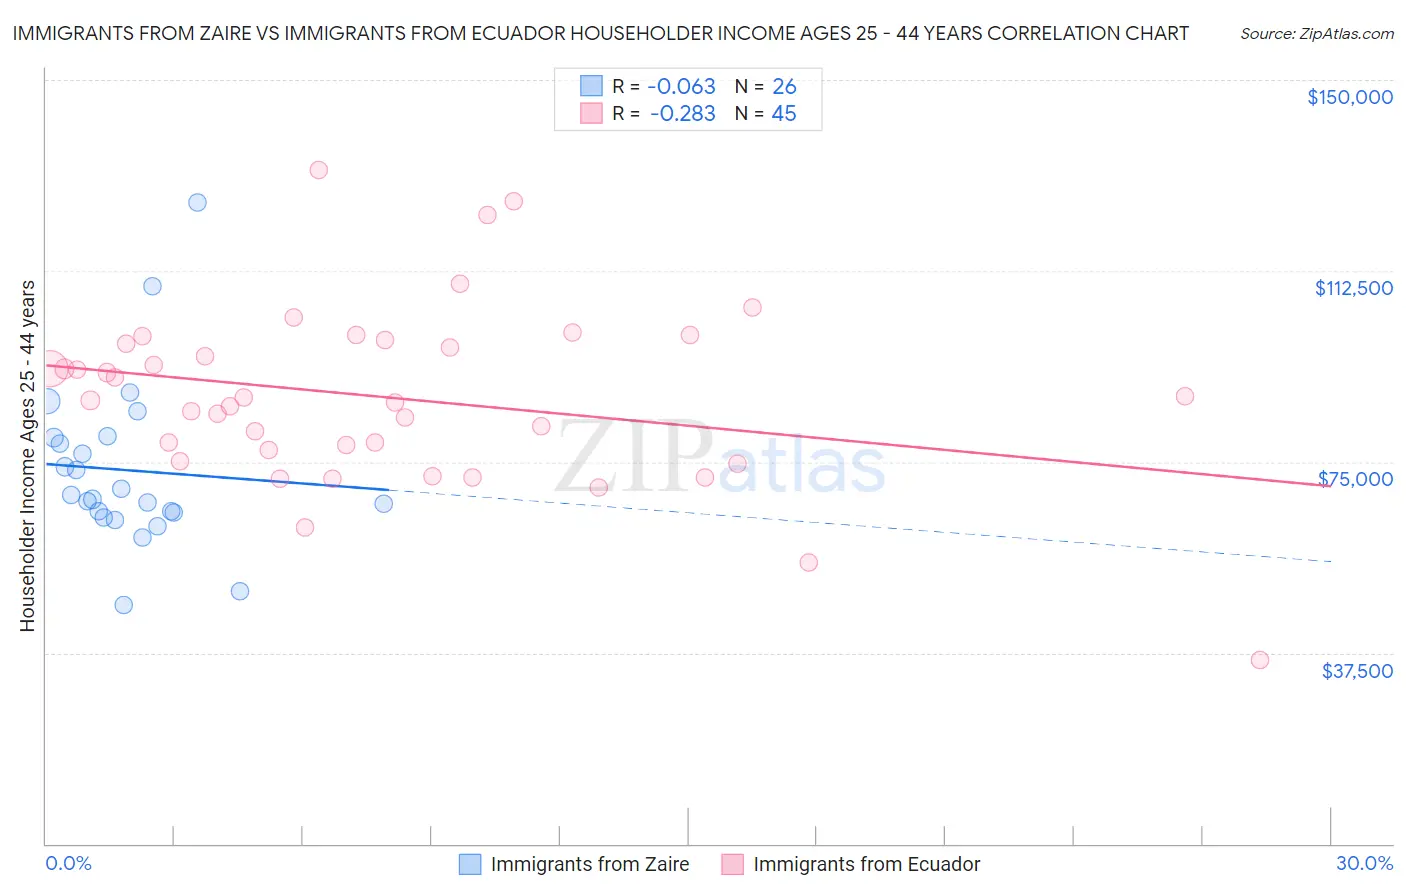 Immigrants from Zaire vs Immigrants from Ecuador Householder Income Ages 25 - 44 years